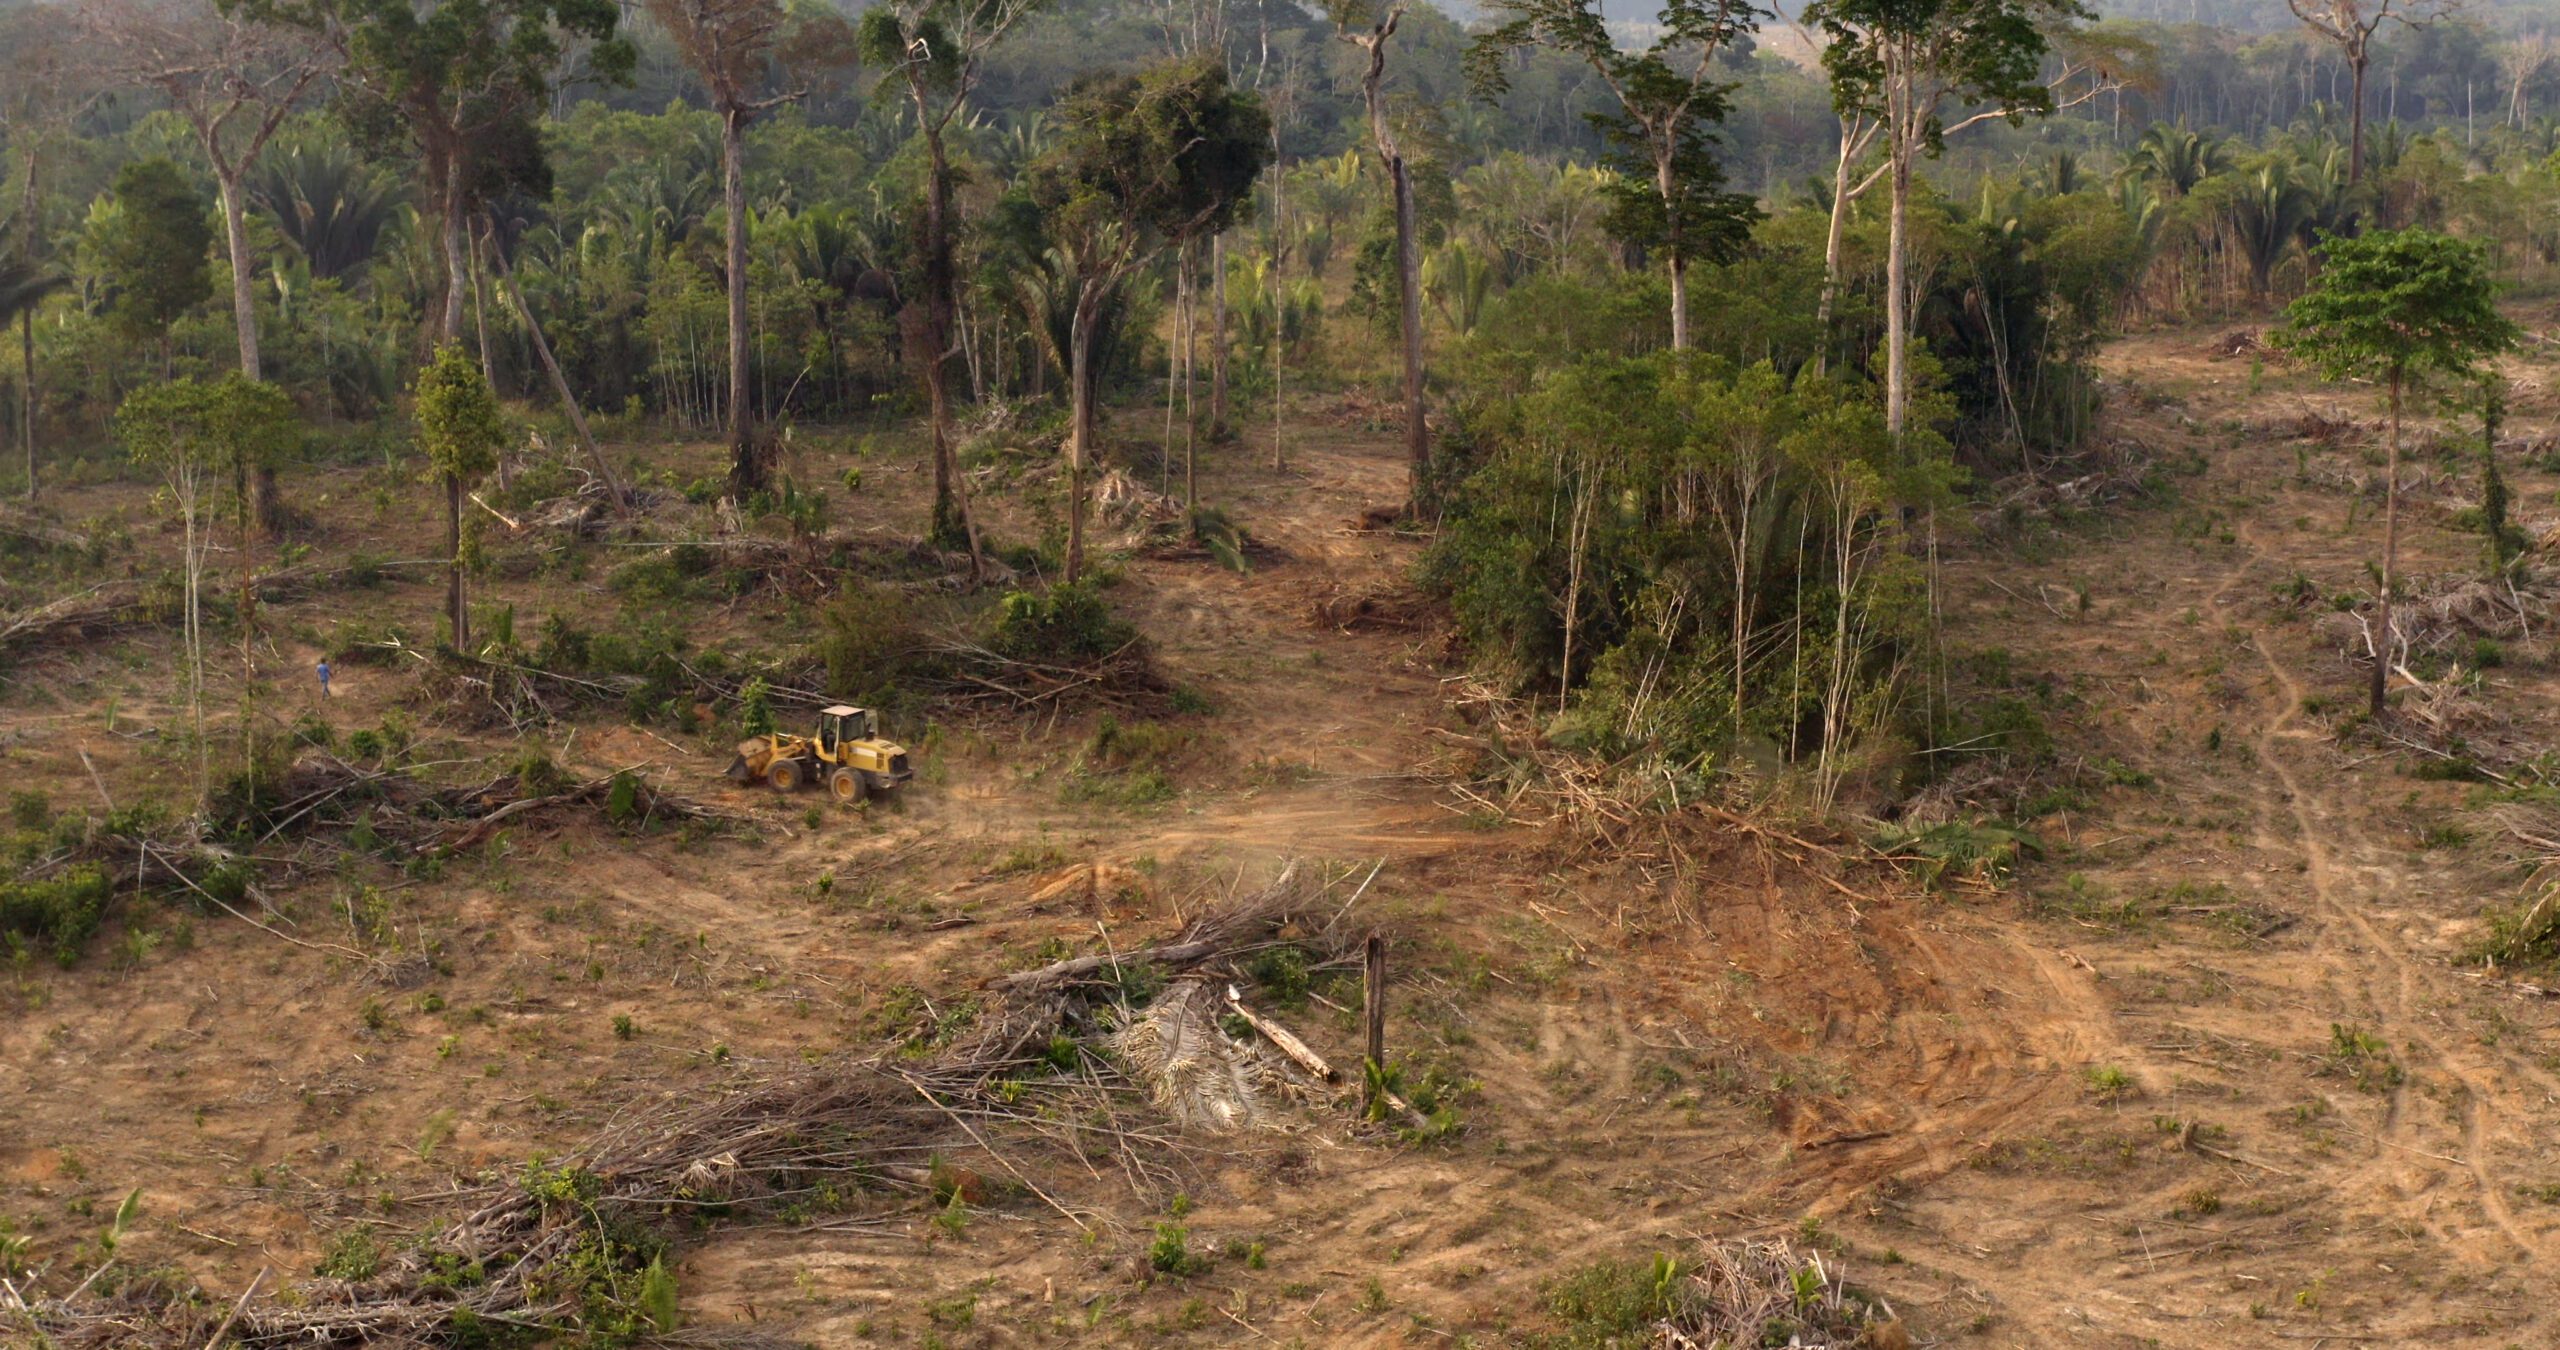 A photo of a clearcut section of the Amazon